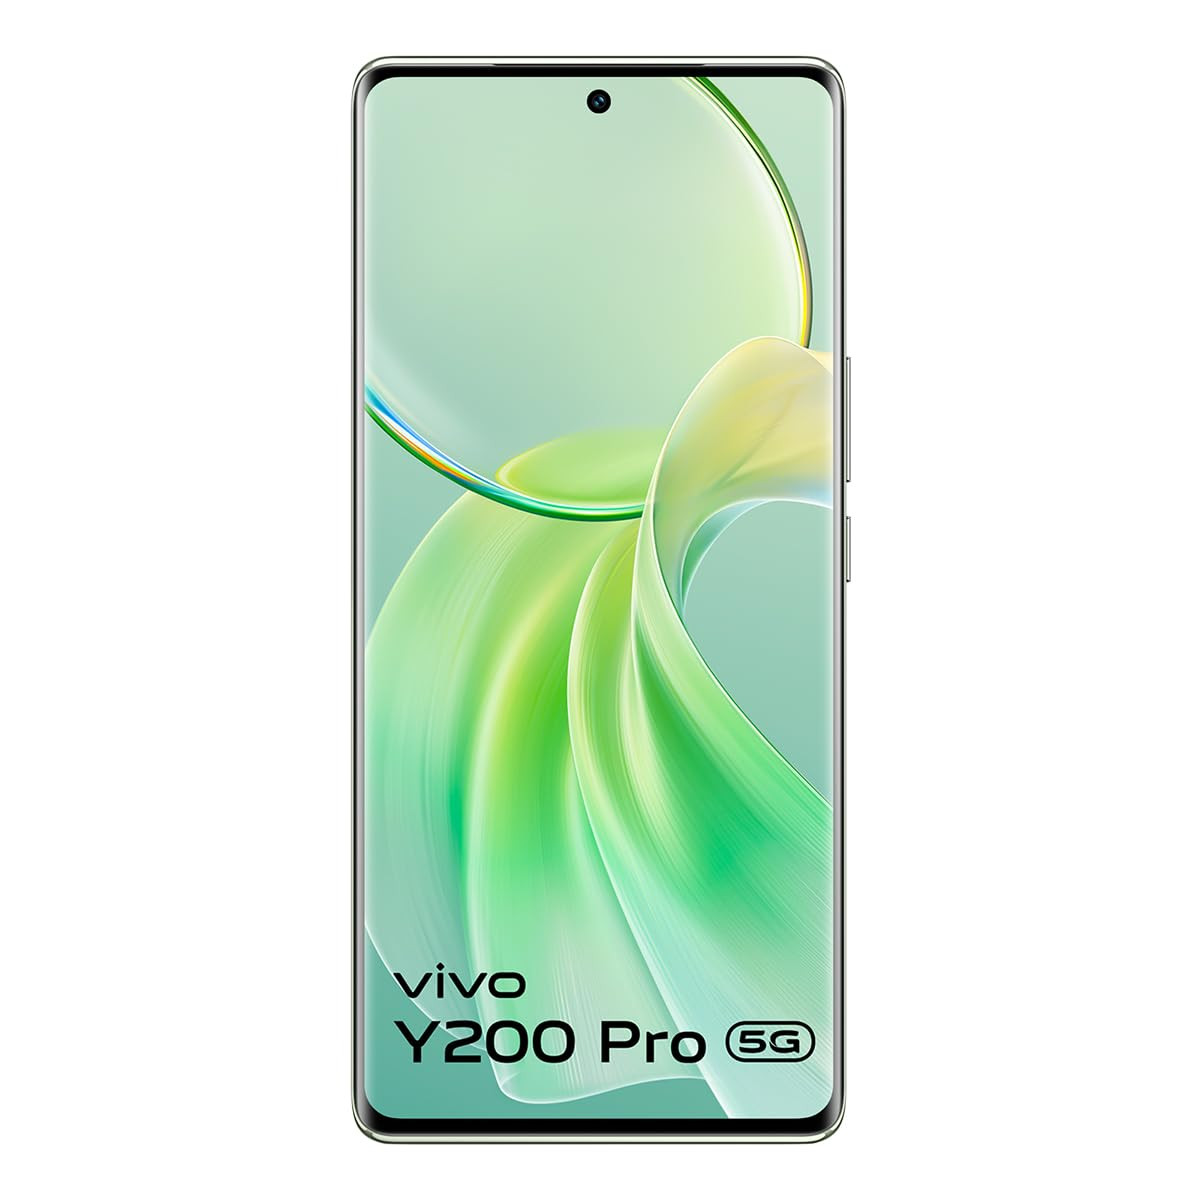 vivo Y200 Pro 5G Silk Green 8GB RAM 128GB Storage with No Cost EMIAdditional Exchange Offers  3D Curved AMOLED Display